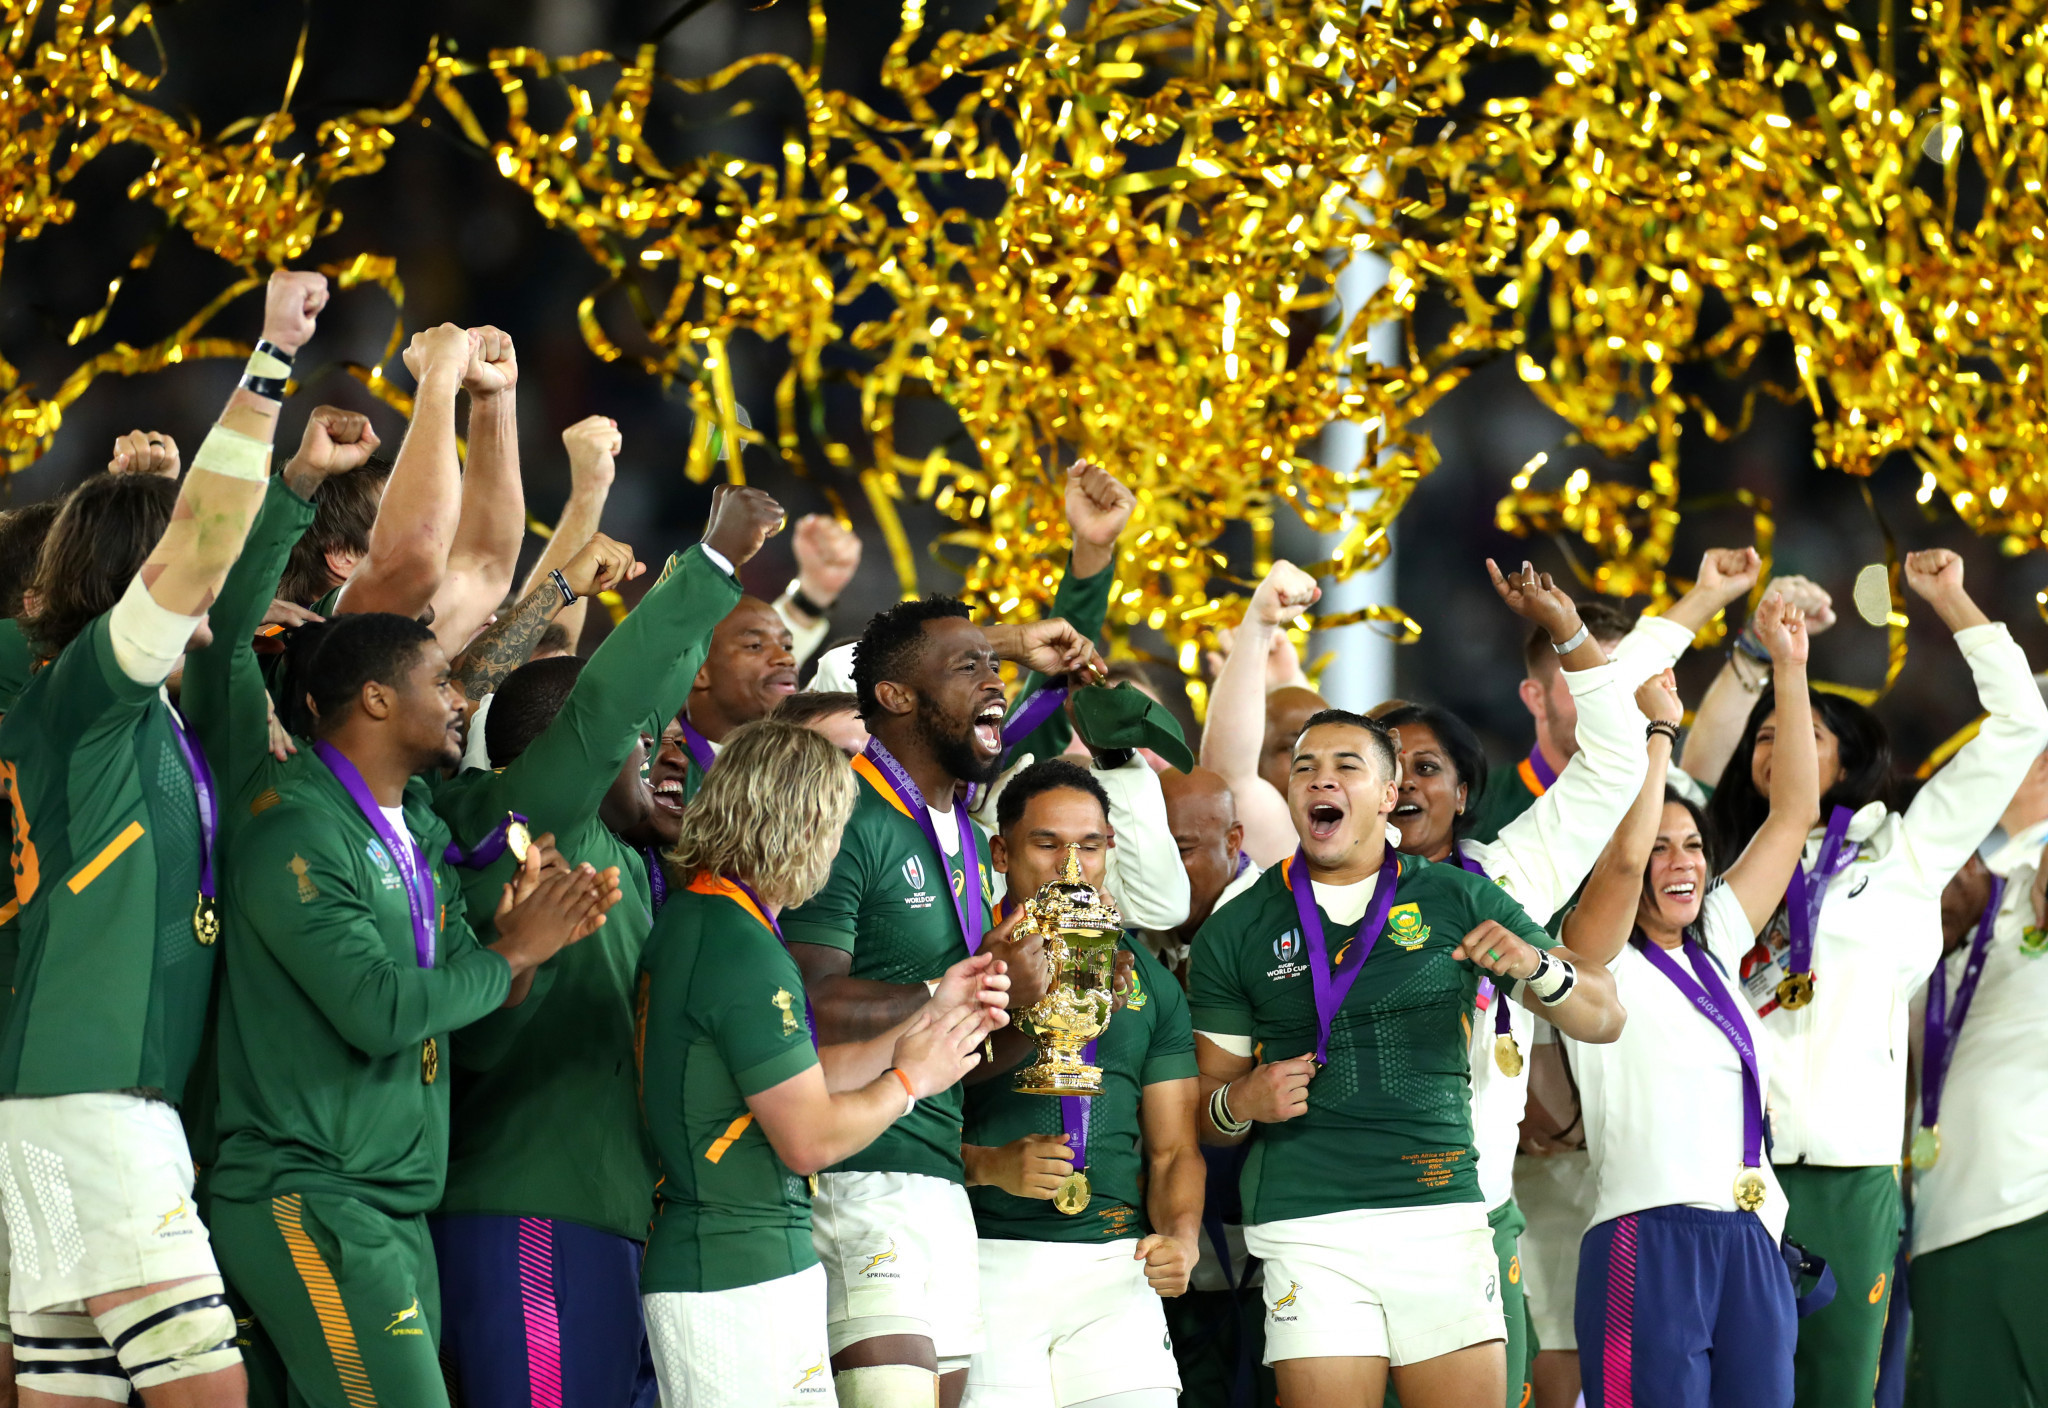 South Africa emphatically celebrated winning the 2019 Rugby World Cup ©Getty Images